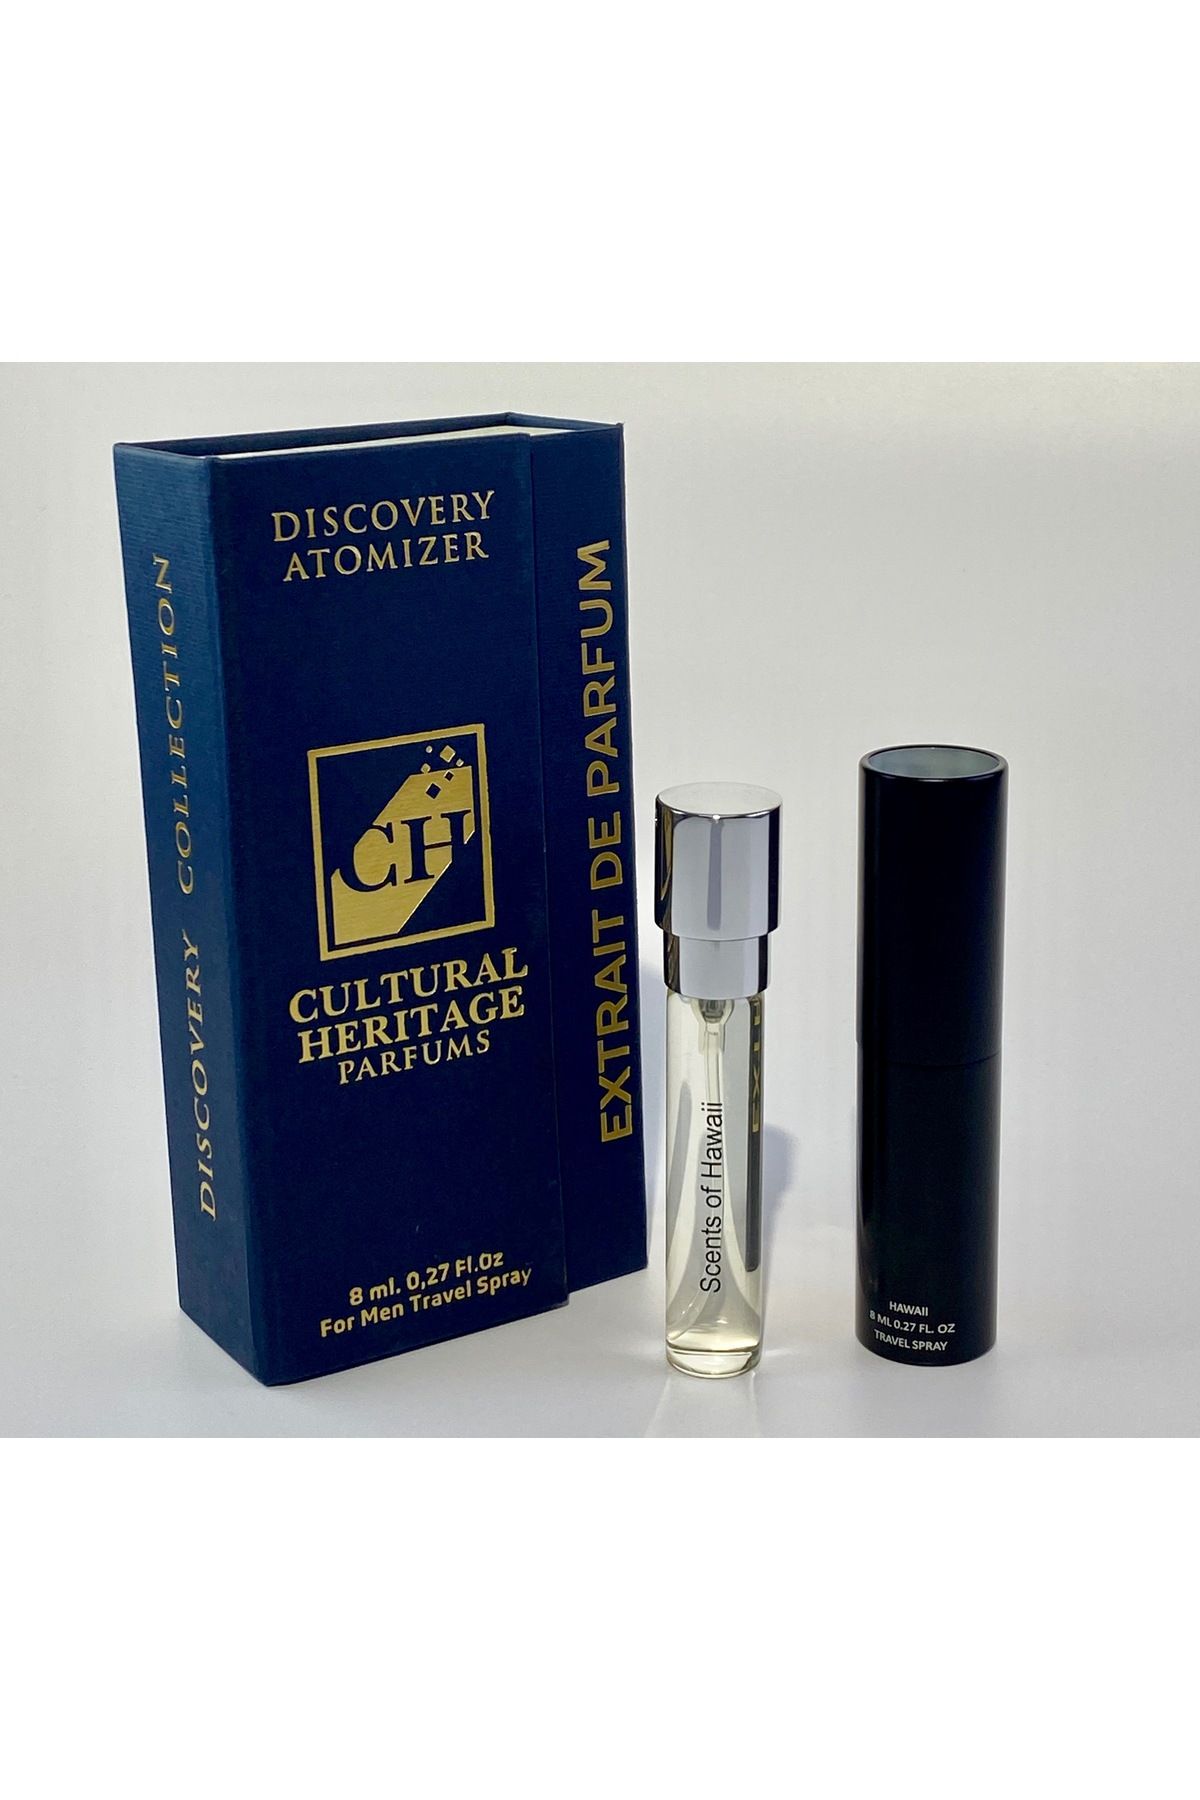 CH CULTURAL HERITAGE , Scents of Hawaii, Discovery Atomizer Travel Spray, for Men,